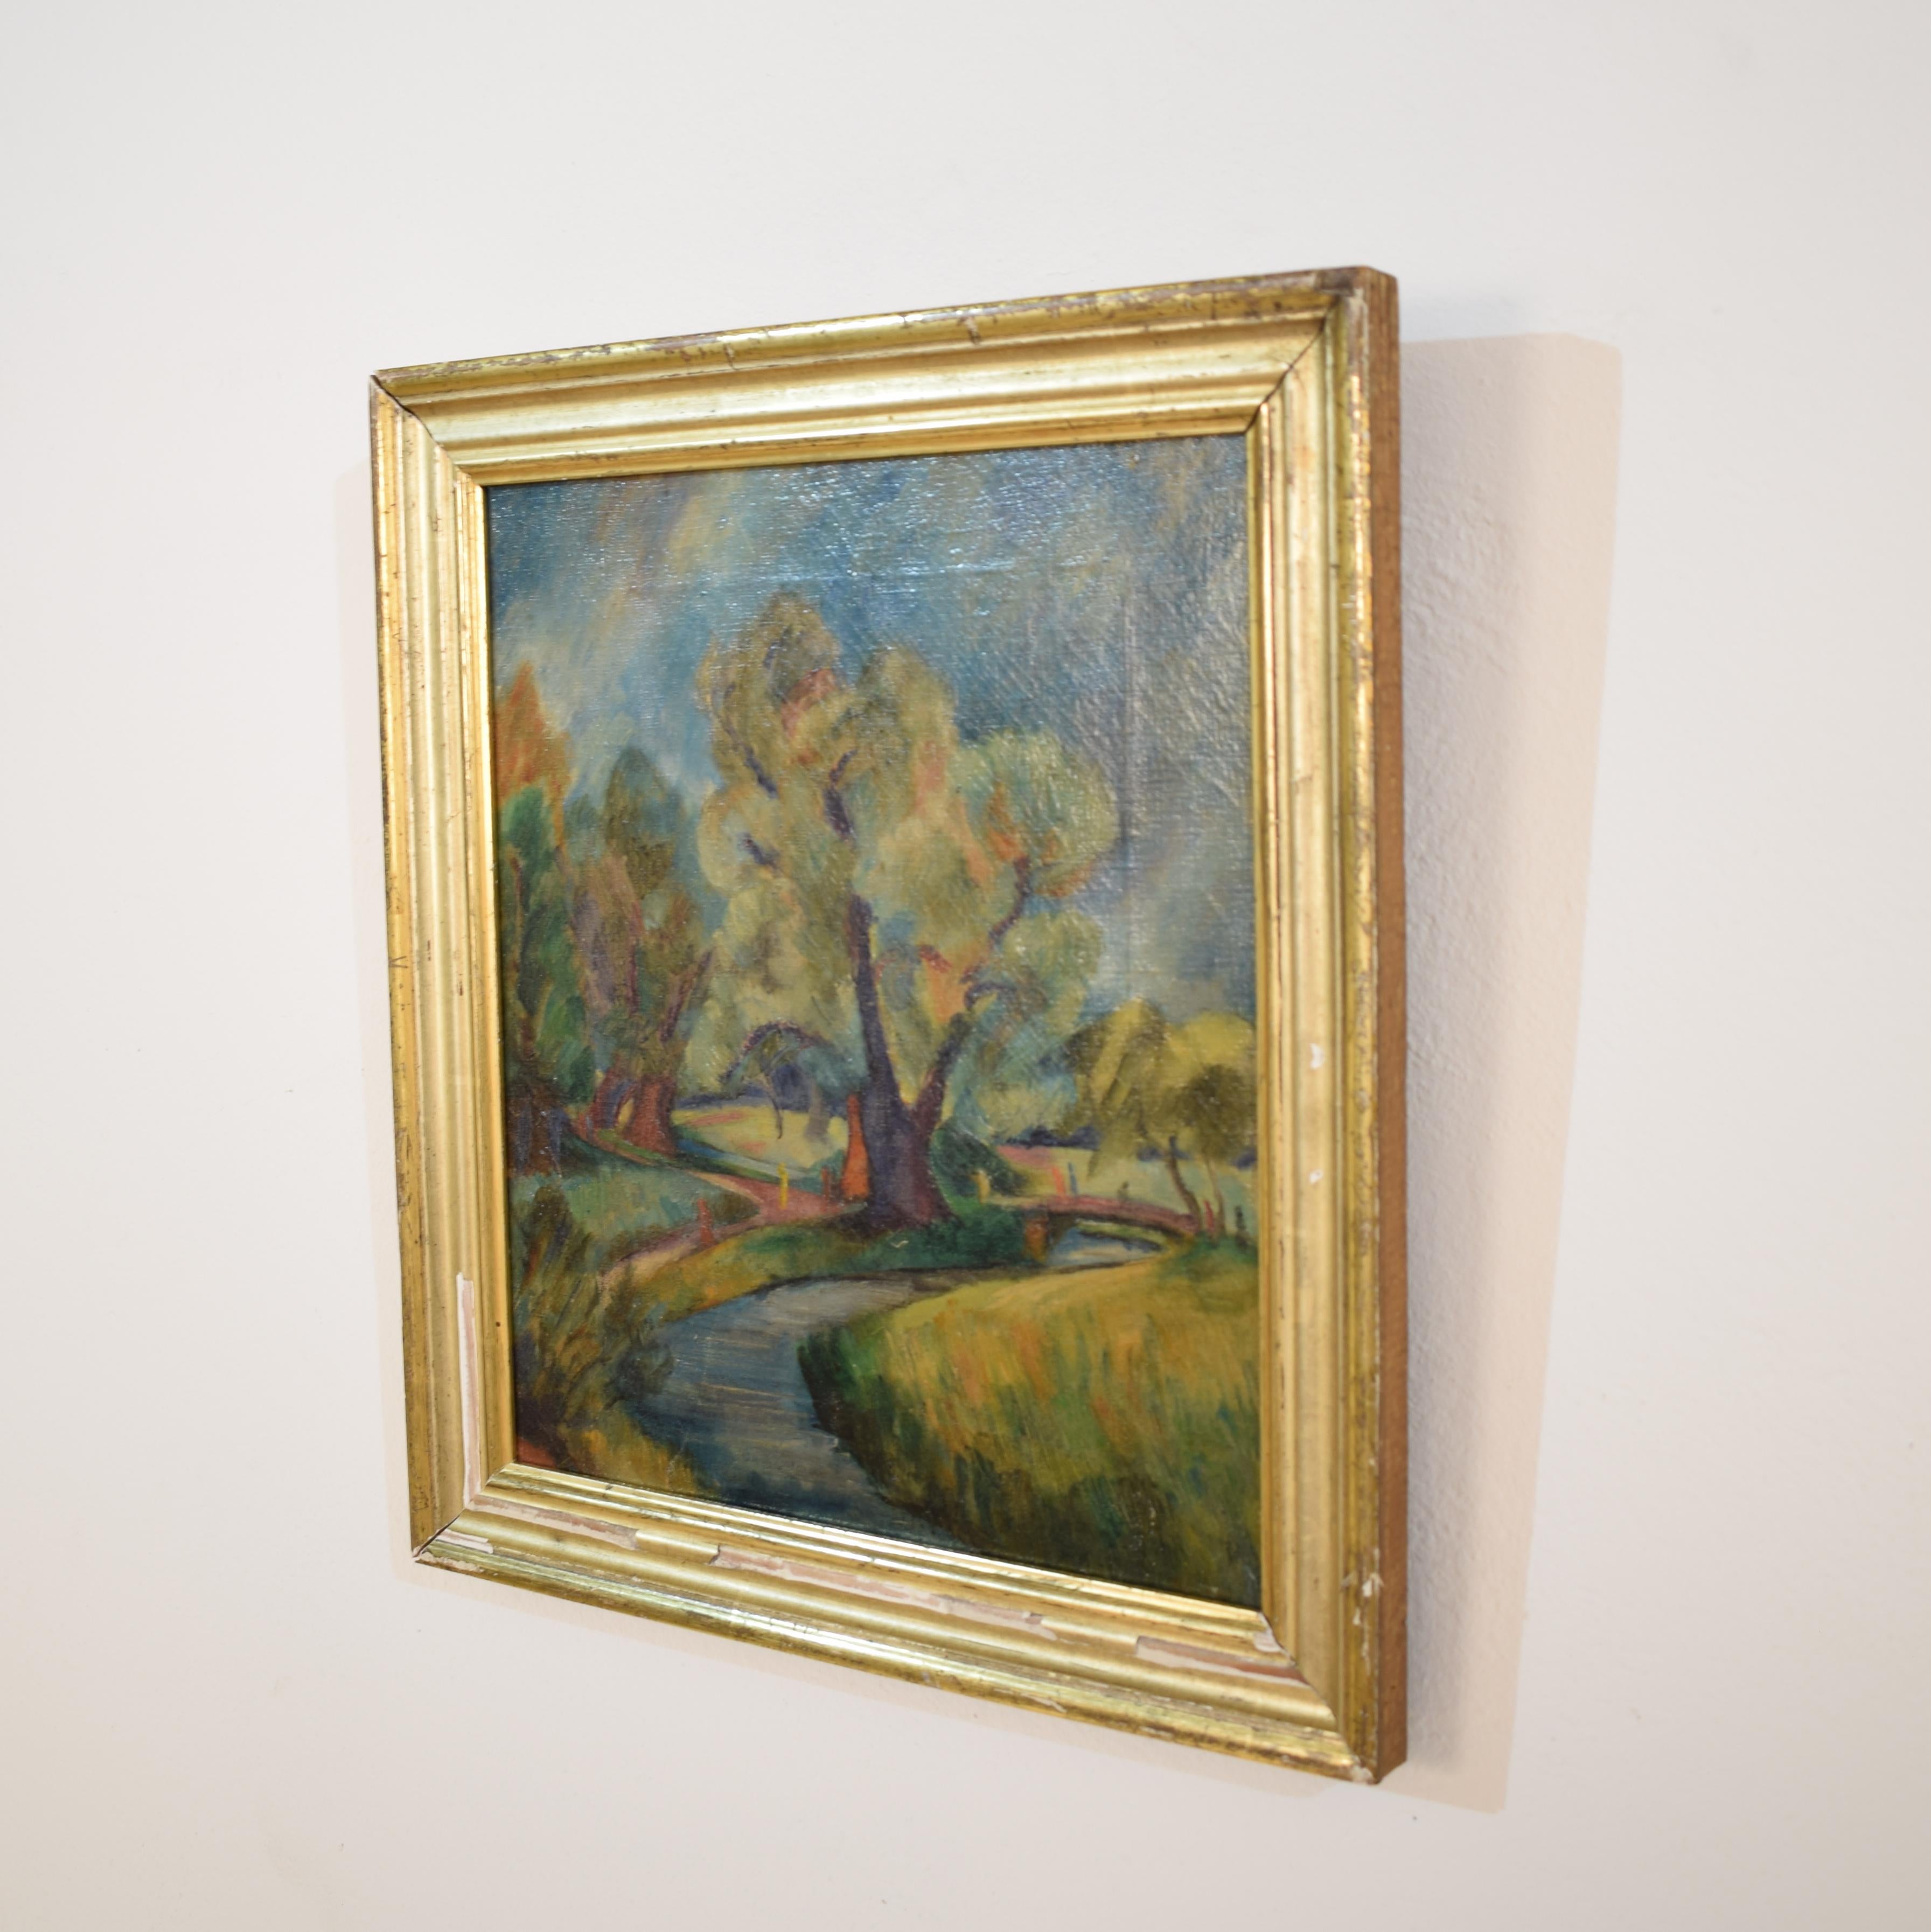 This charming German landscape oil painting on canvas shows a park scene. It is very beautifully painted and looks a bit like Chagall or Monet. 
The painting comes with an old frame. 
The measurements without frame are: 28.5 cm, 33cm. 
A unique